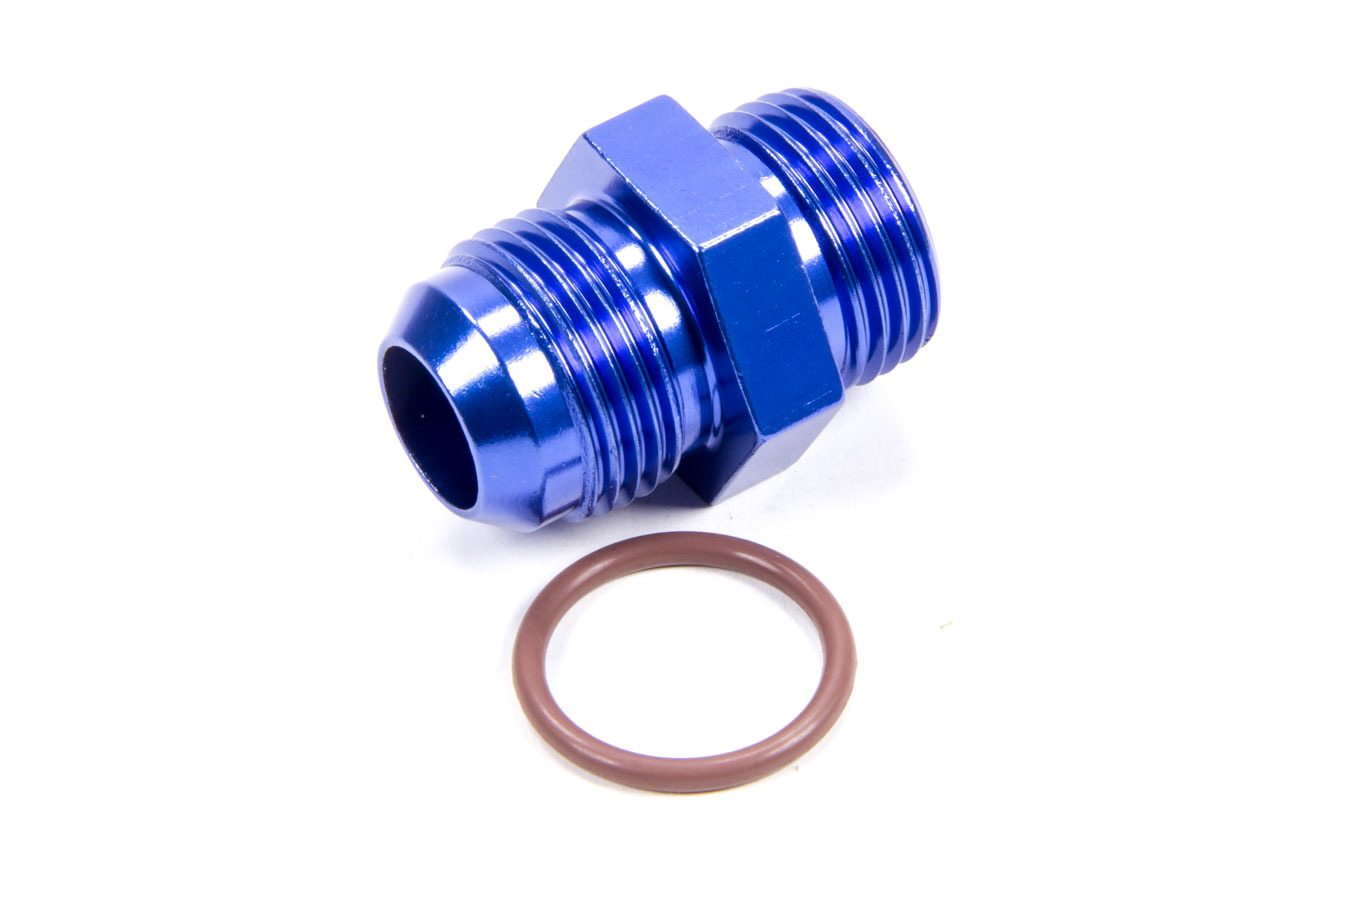 Fragola 495109 Fitting, Adapter, Straight, 12 AN Male to 12 AN Male O-Ring, Aluminum, Blue Anodized, Each